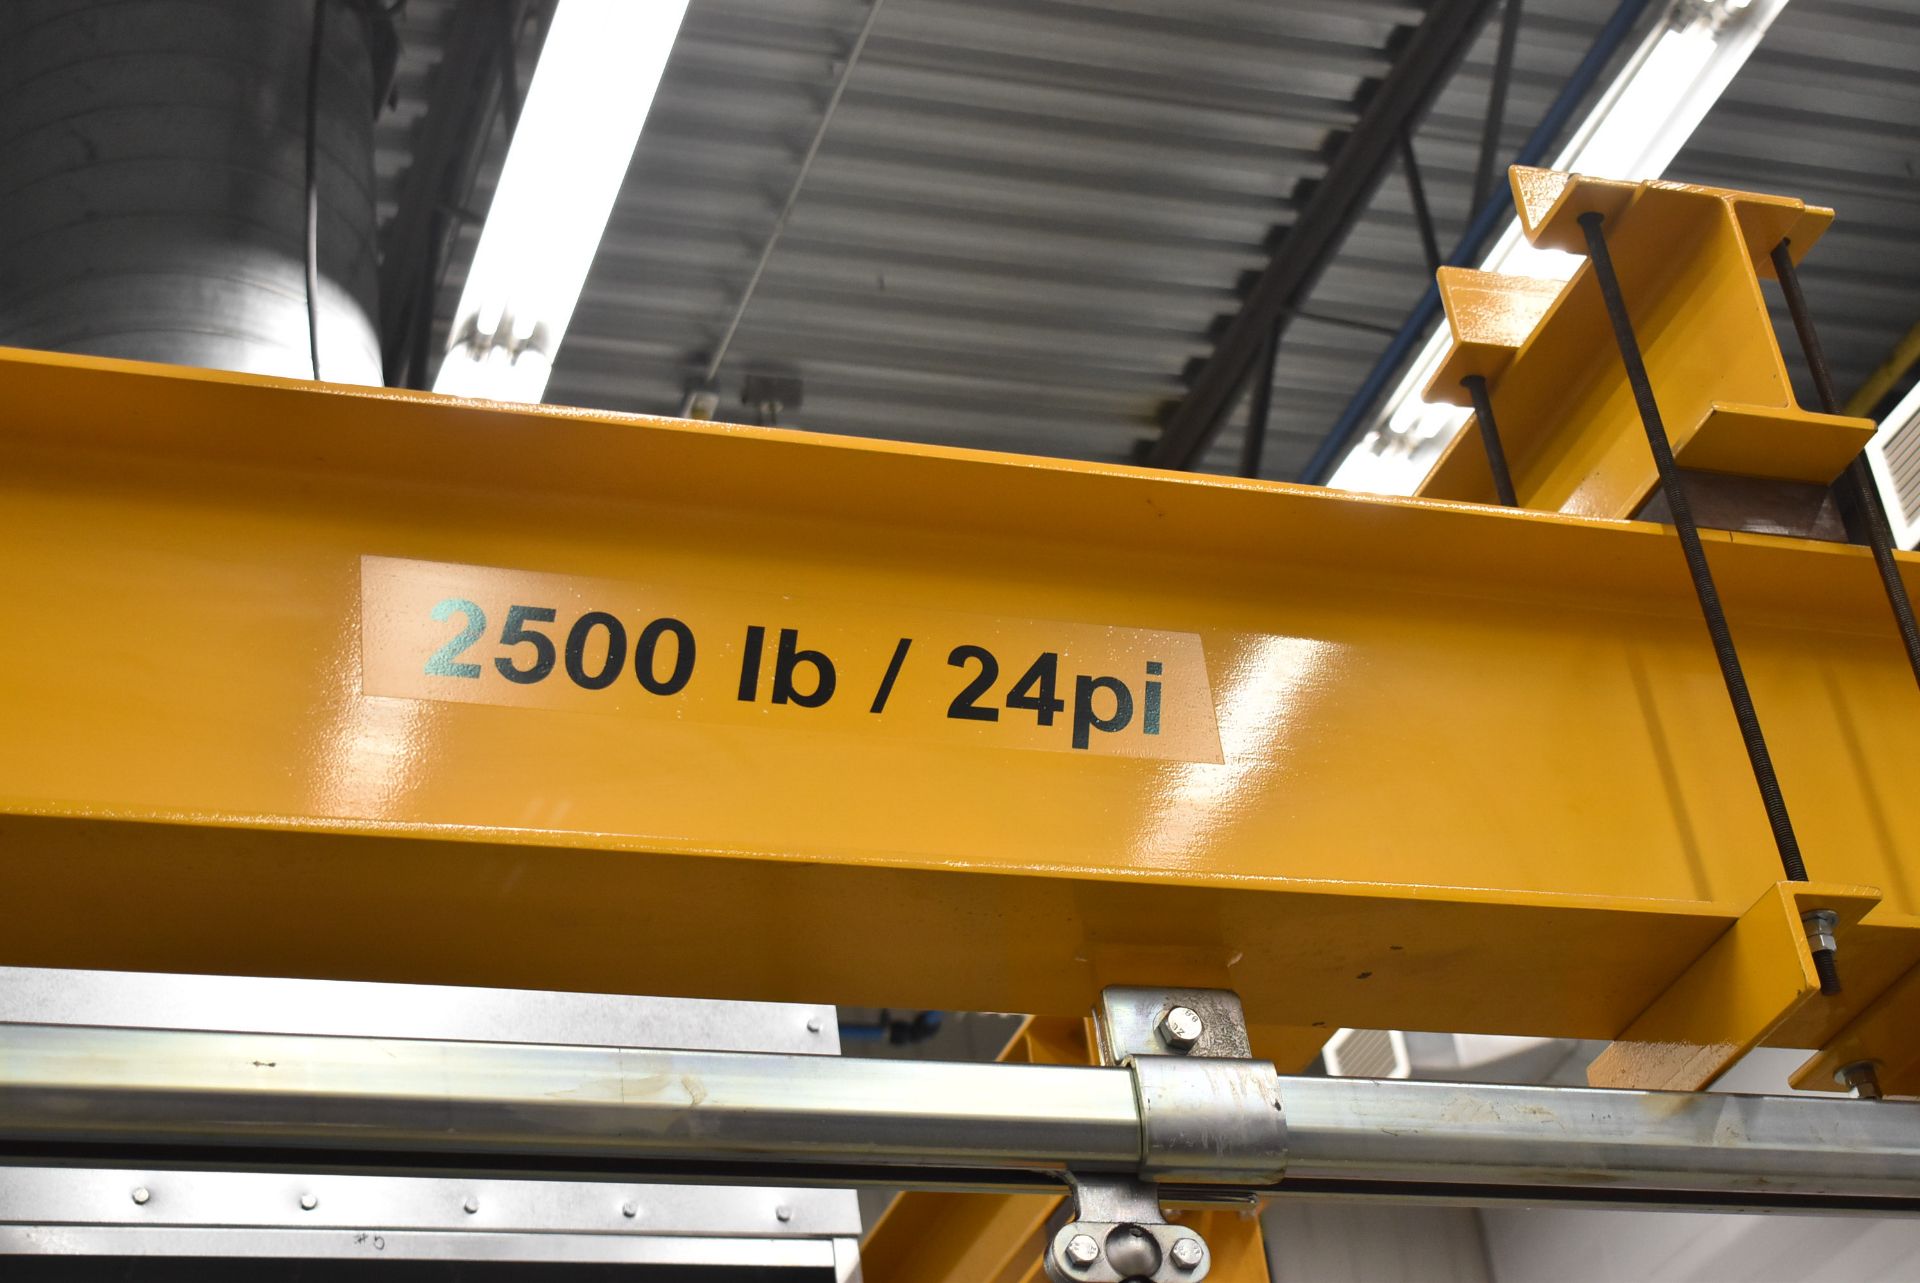 SMAK MANUTENTION 2,500 LB./24 PI CAPACITY APPROX. 1,236" MONORAIL OVERHEAD CONVEYOR WITH 100" - Image 6 of 11